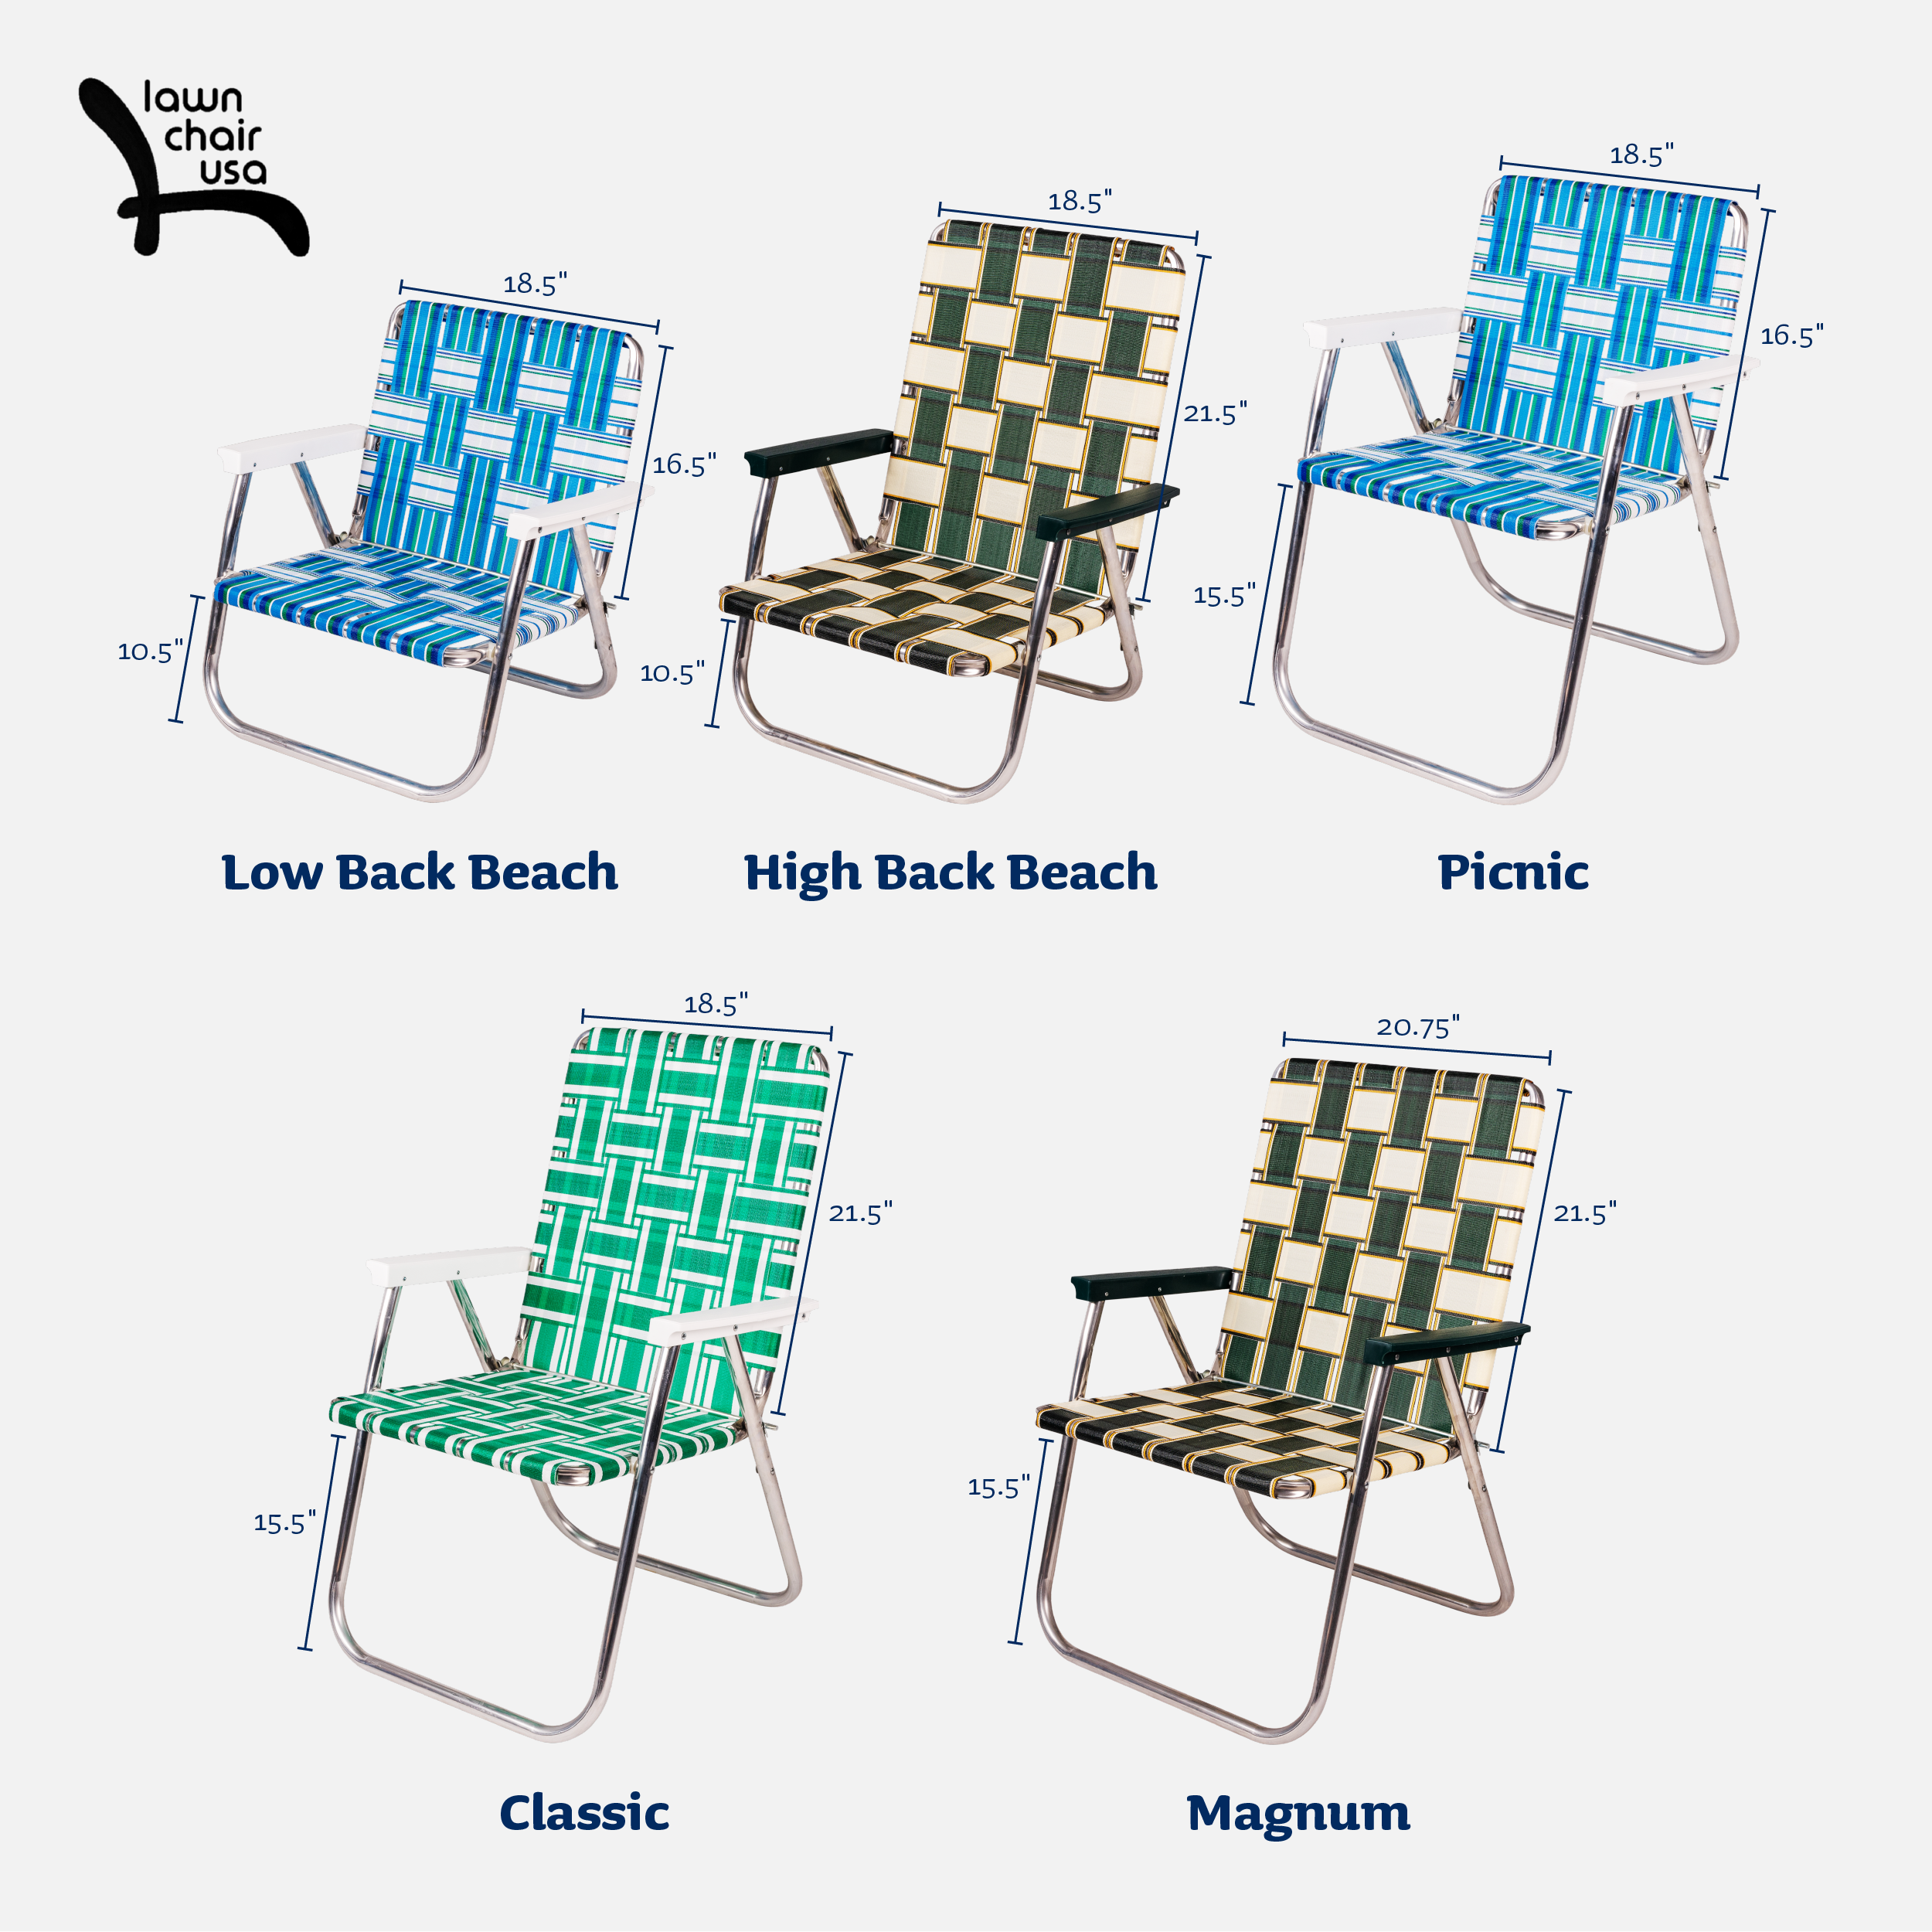 Lawn Chair USA Webbing Chair Magnum | Folding Aluminum Lawn Chair with UV-Resistant Webbing | For Camping | Sports and Beach | Old Glory with White Arms - image 4 of 7